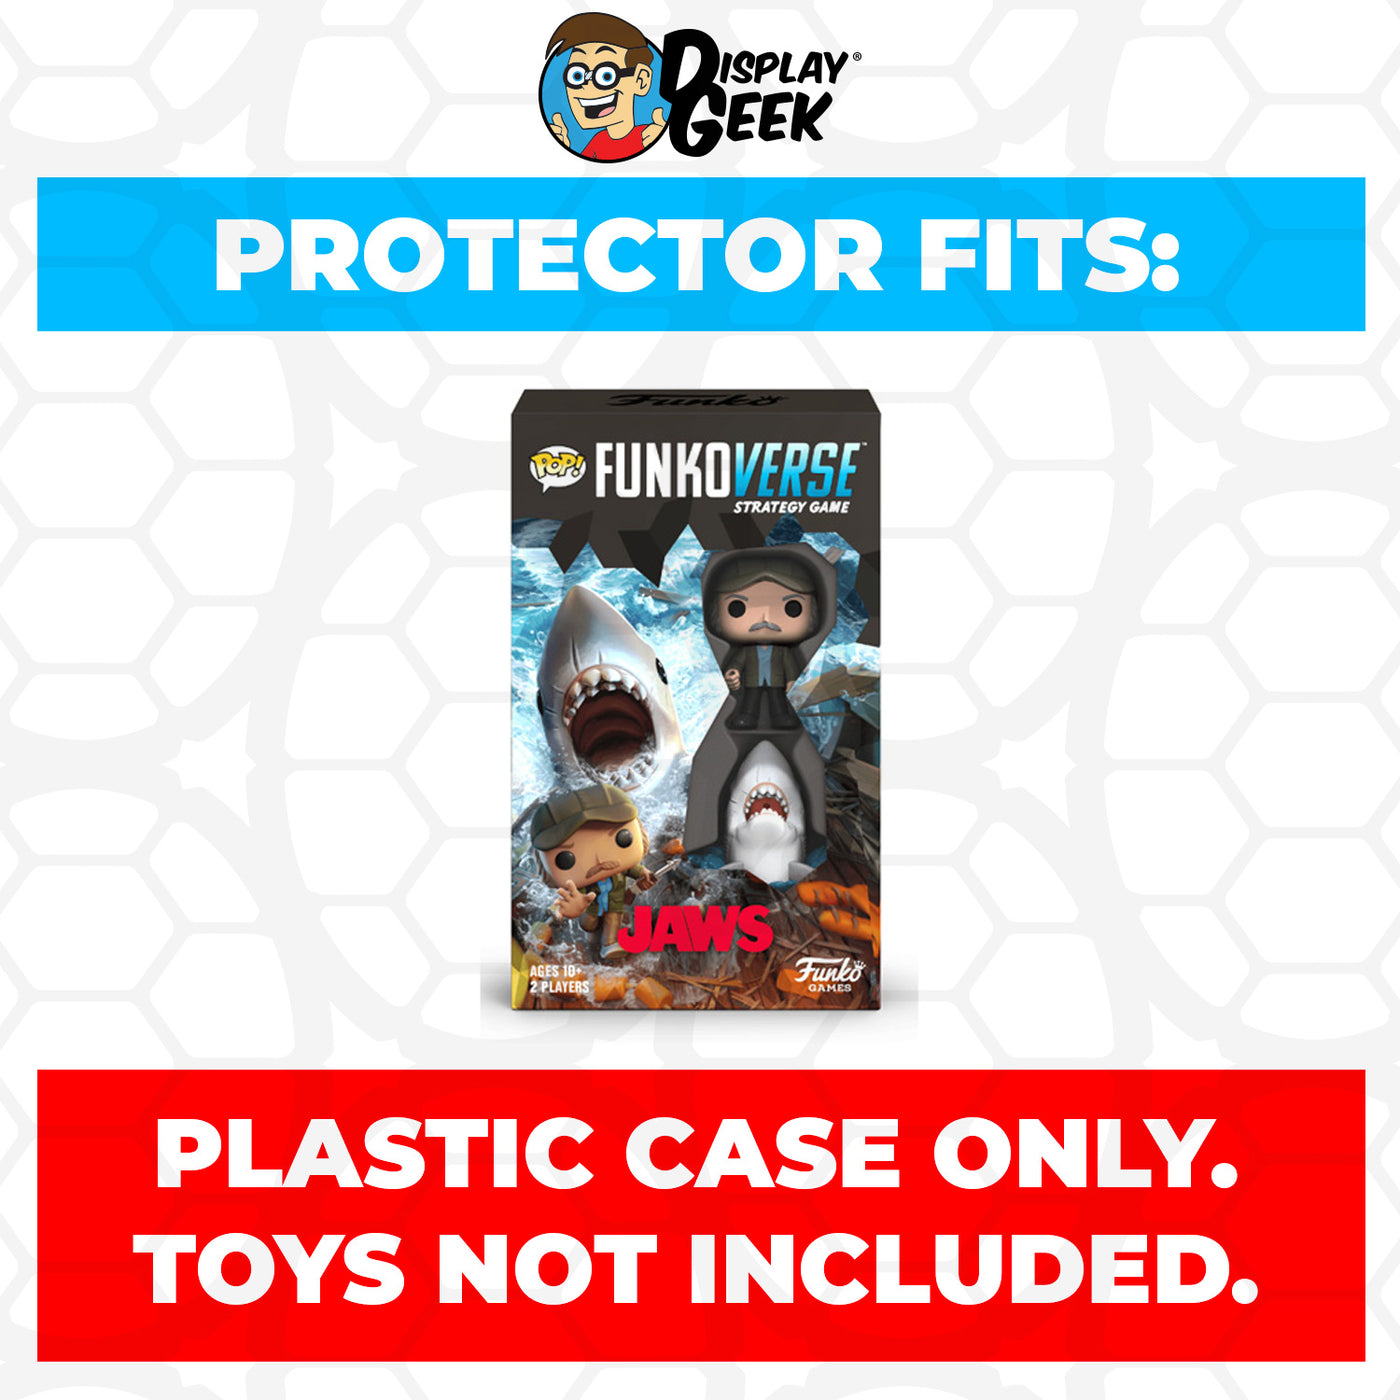 Pop Protector for Funkoverse Jaws 100 Funko 2 Pack on The Protector Guide App by Display Geek